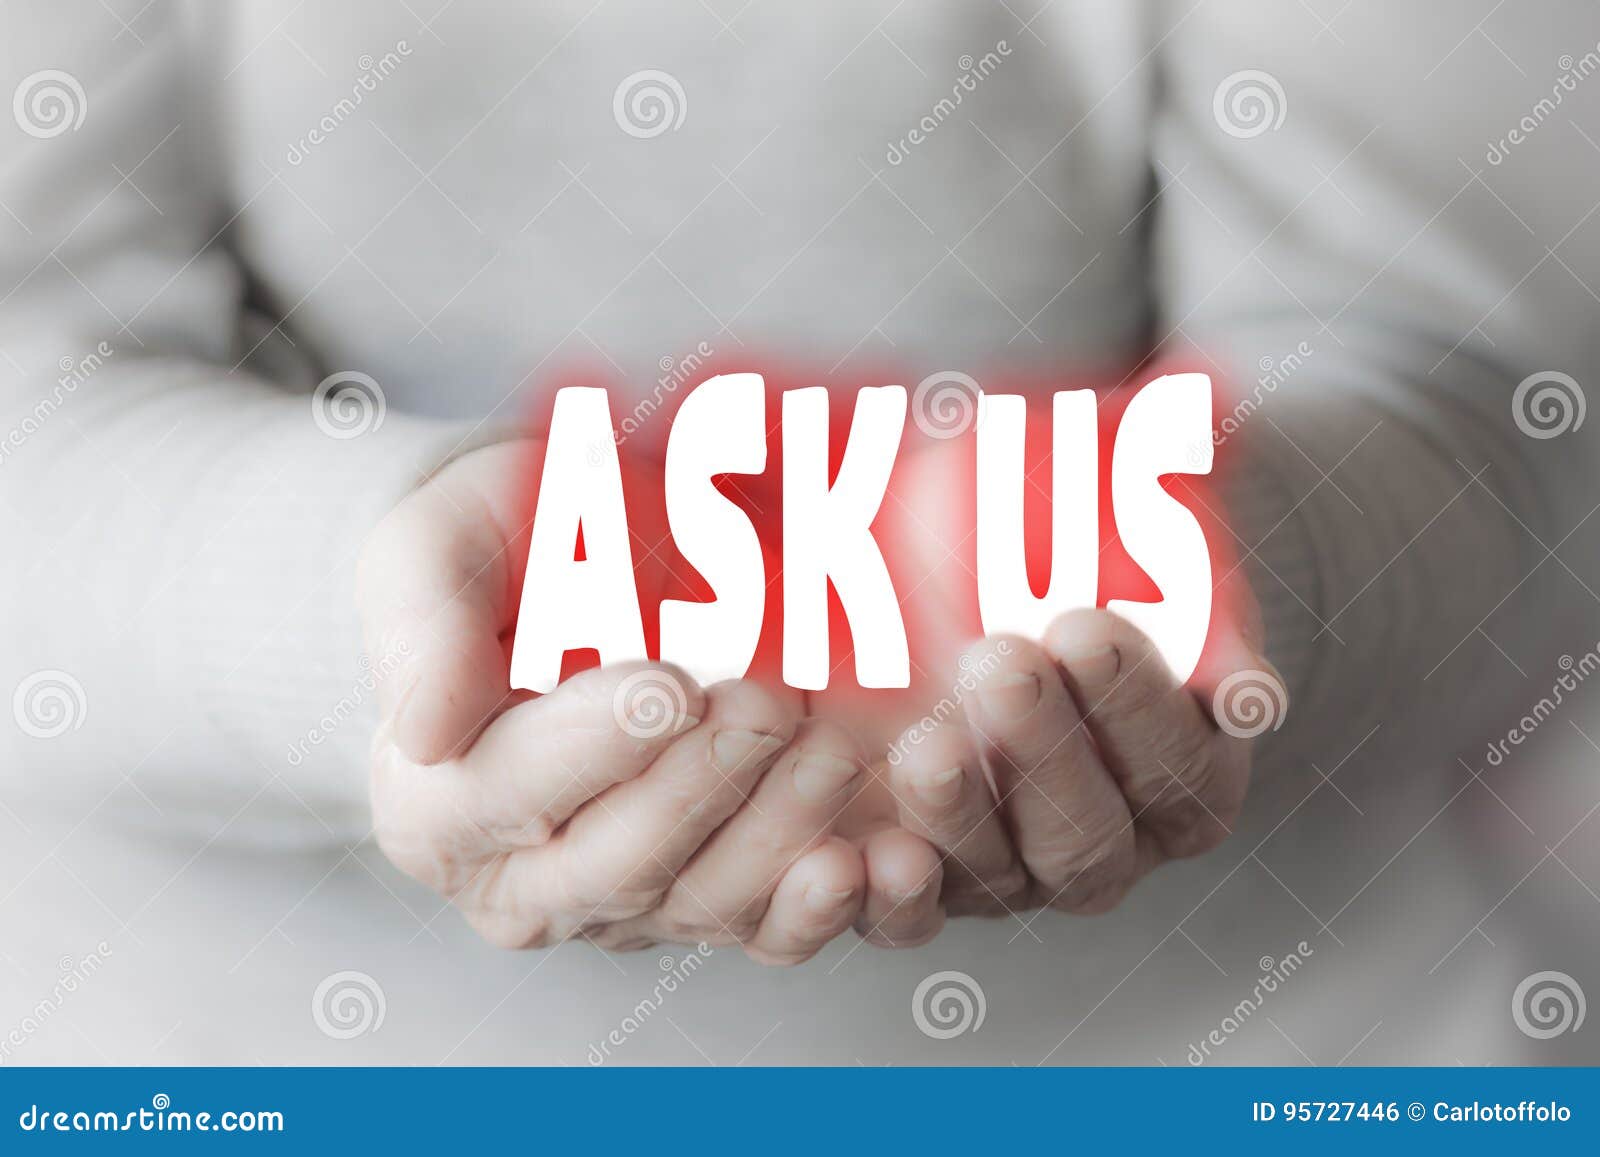 Hands of a Woman Holding the Write ASK US Stock Photo - Image of solve ...